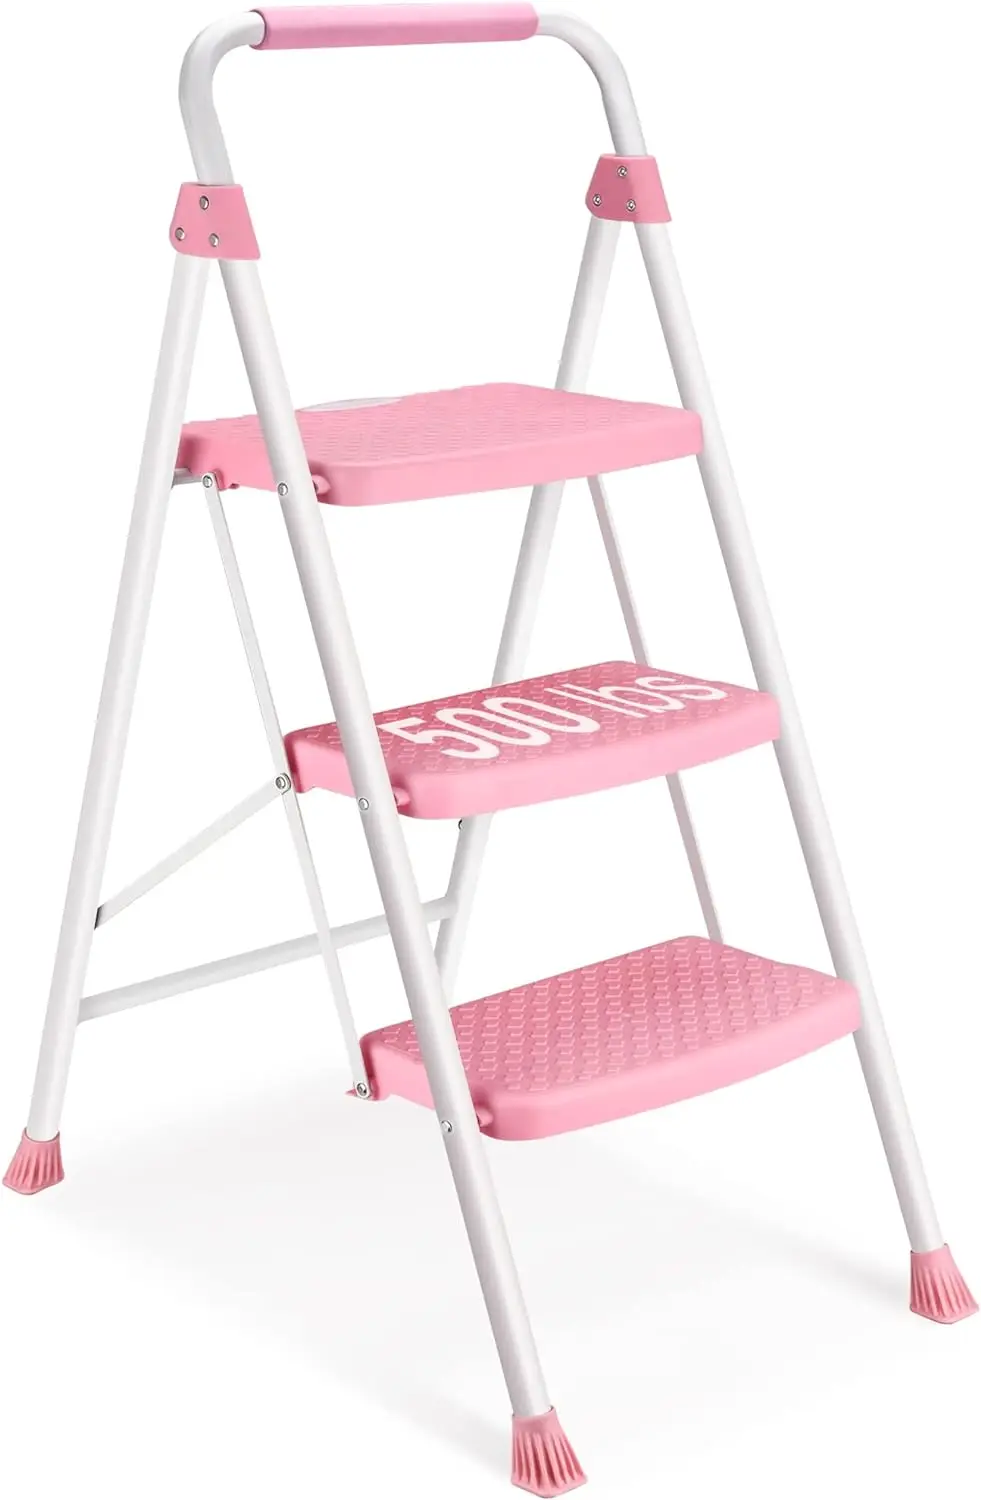 

SocTone 3 Step Ladder, Folding Step Stool with Handle, Wide Anti-Slip Pedal, Lightweight, Multi-Use for Household and Office